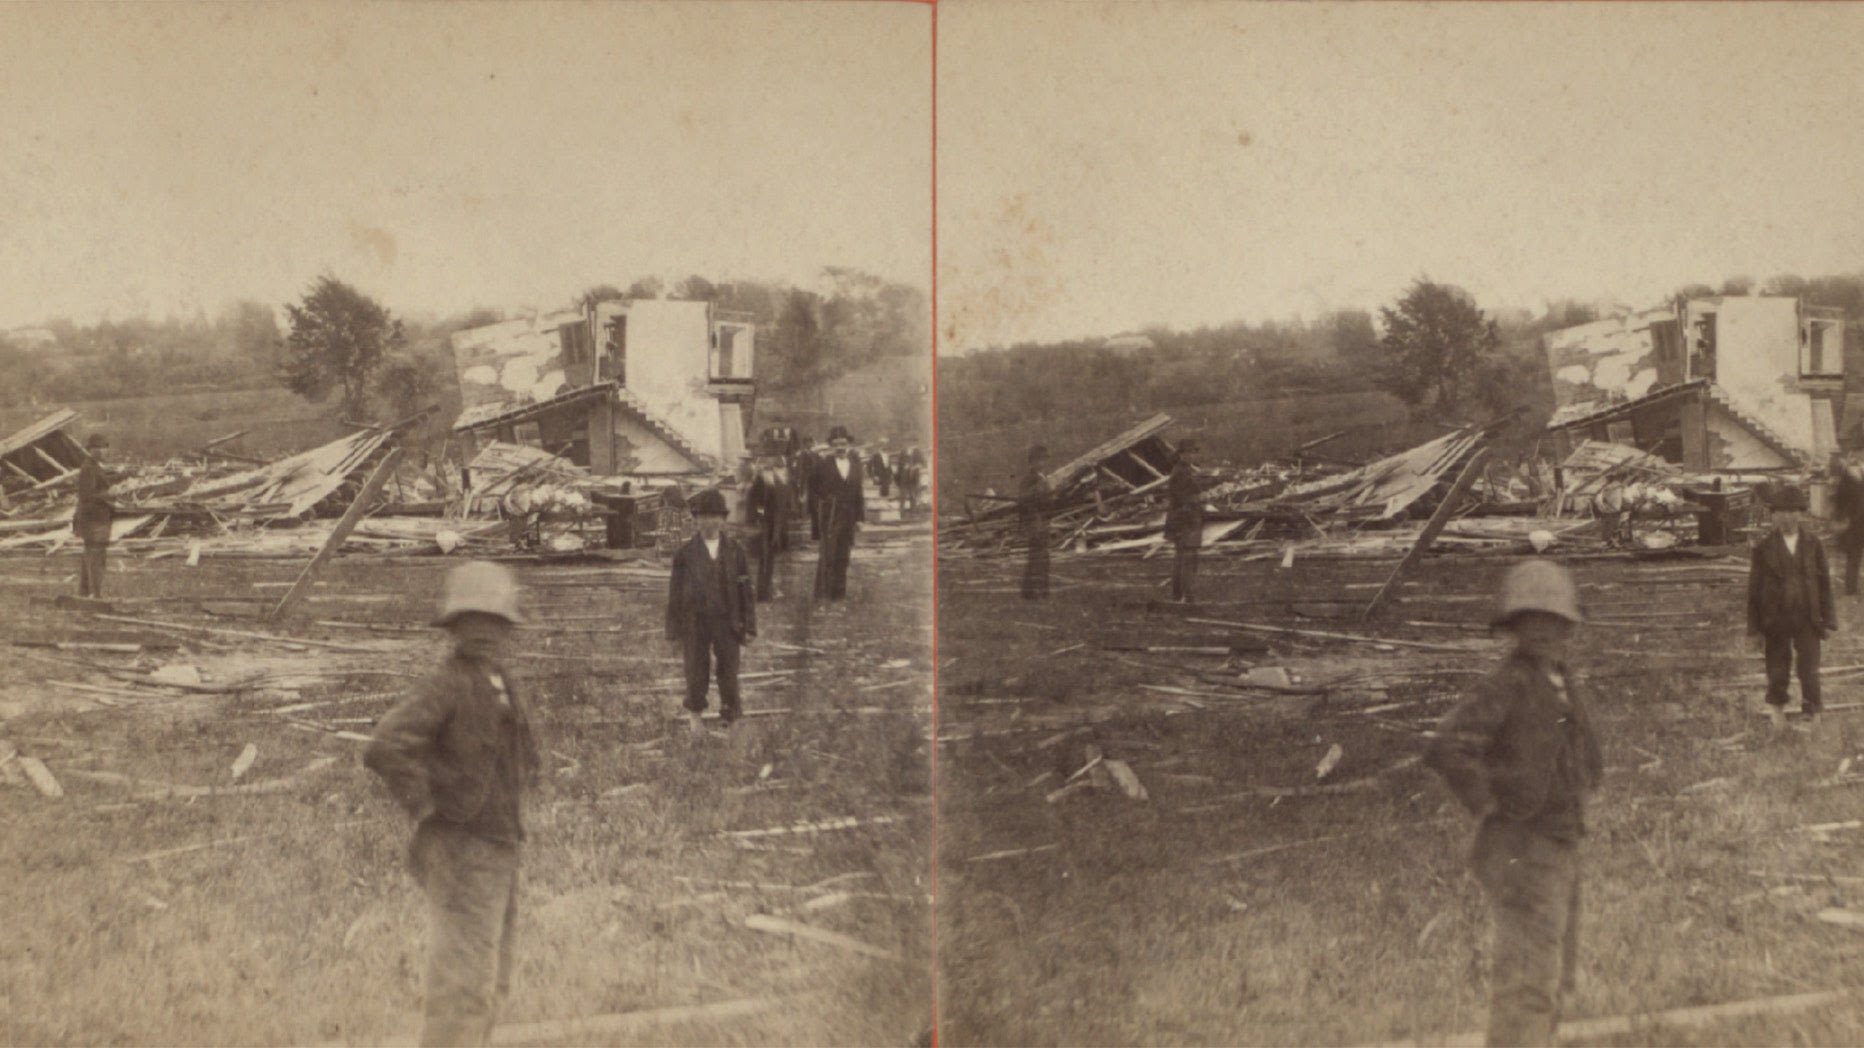 TThis stereoscopic image shows a damaged home in Wallingford, Connecticut, after the tornado.